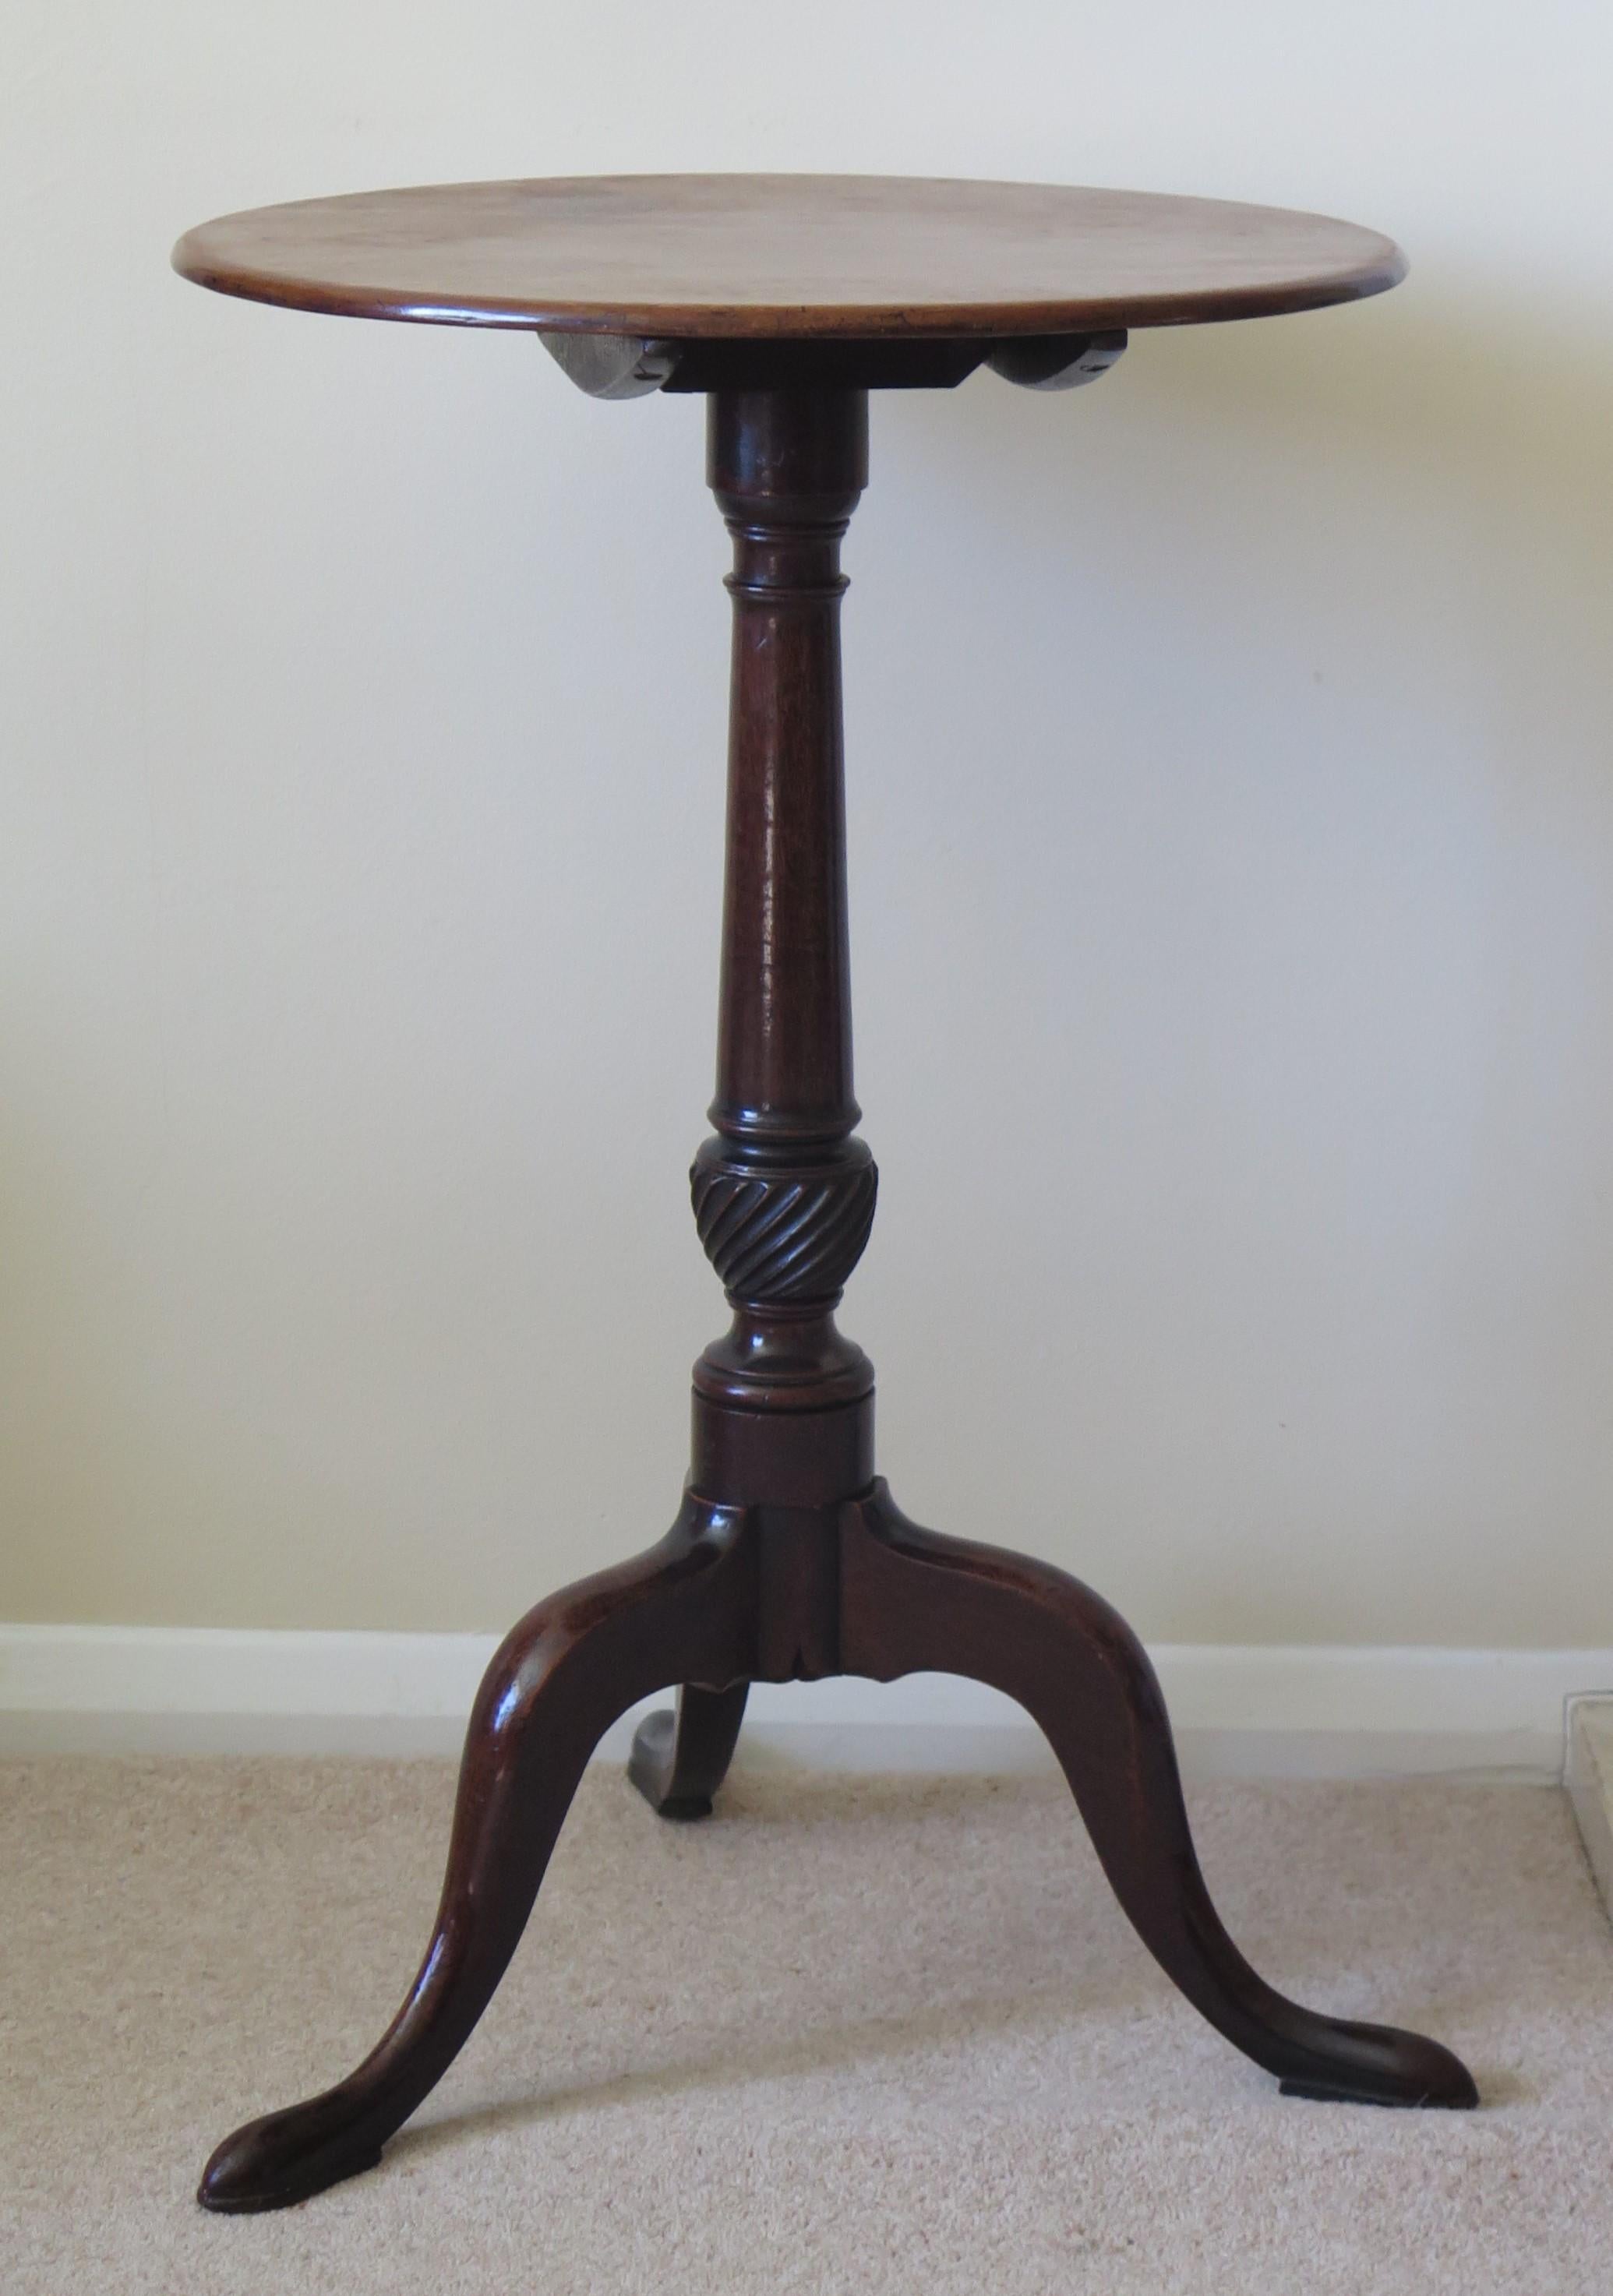 Chippendale Mid Georgian Solid Walnut Wine or Tripod Table One Piece Tilt Top, circa 1760 For Sale